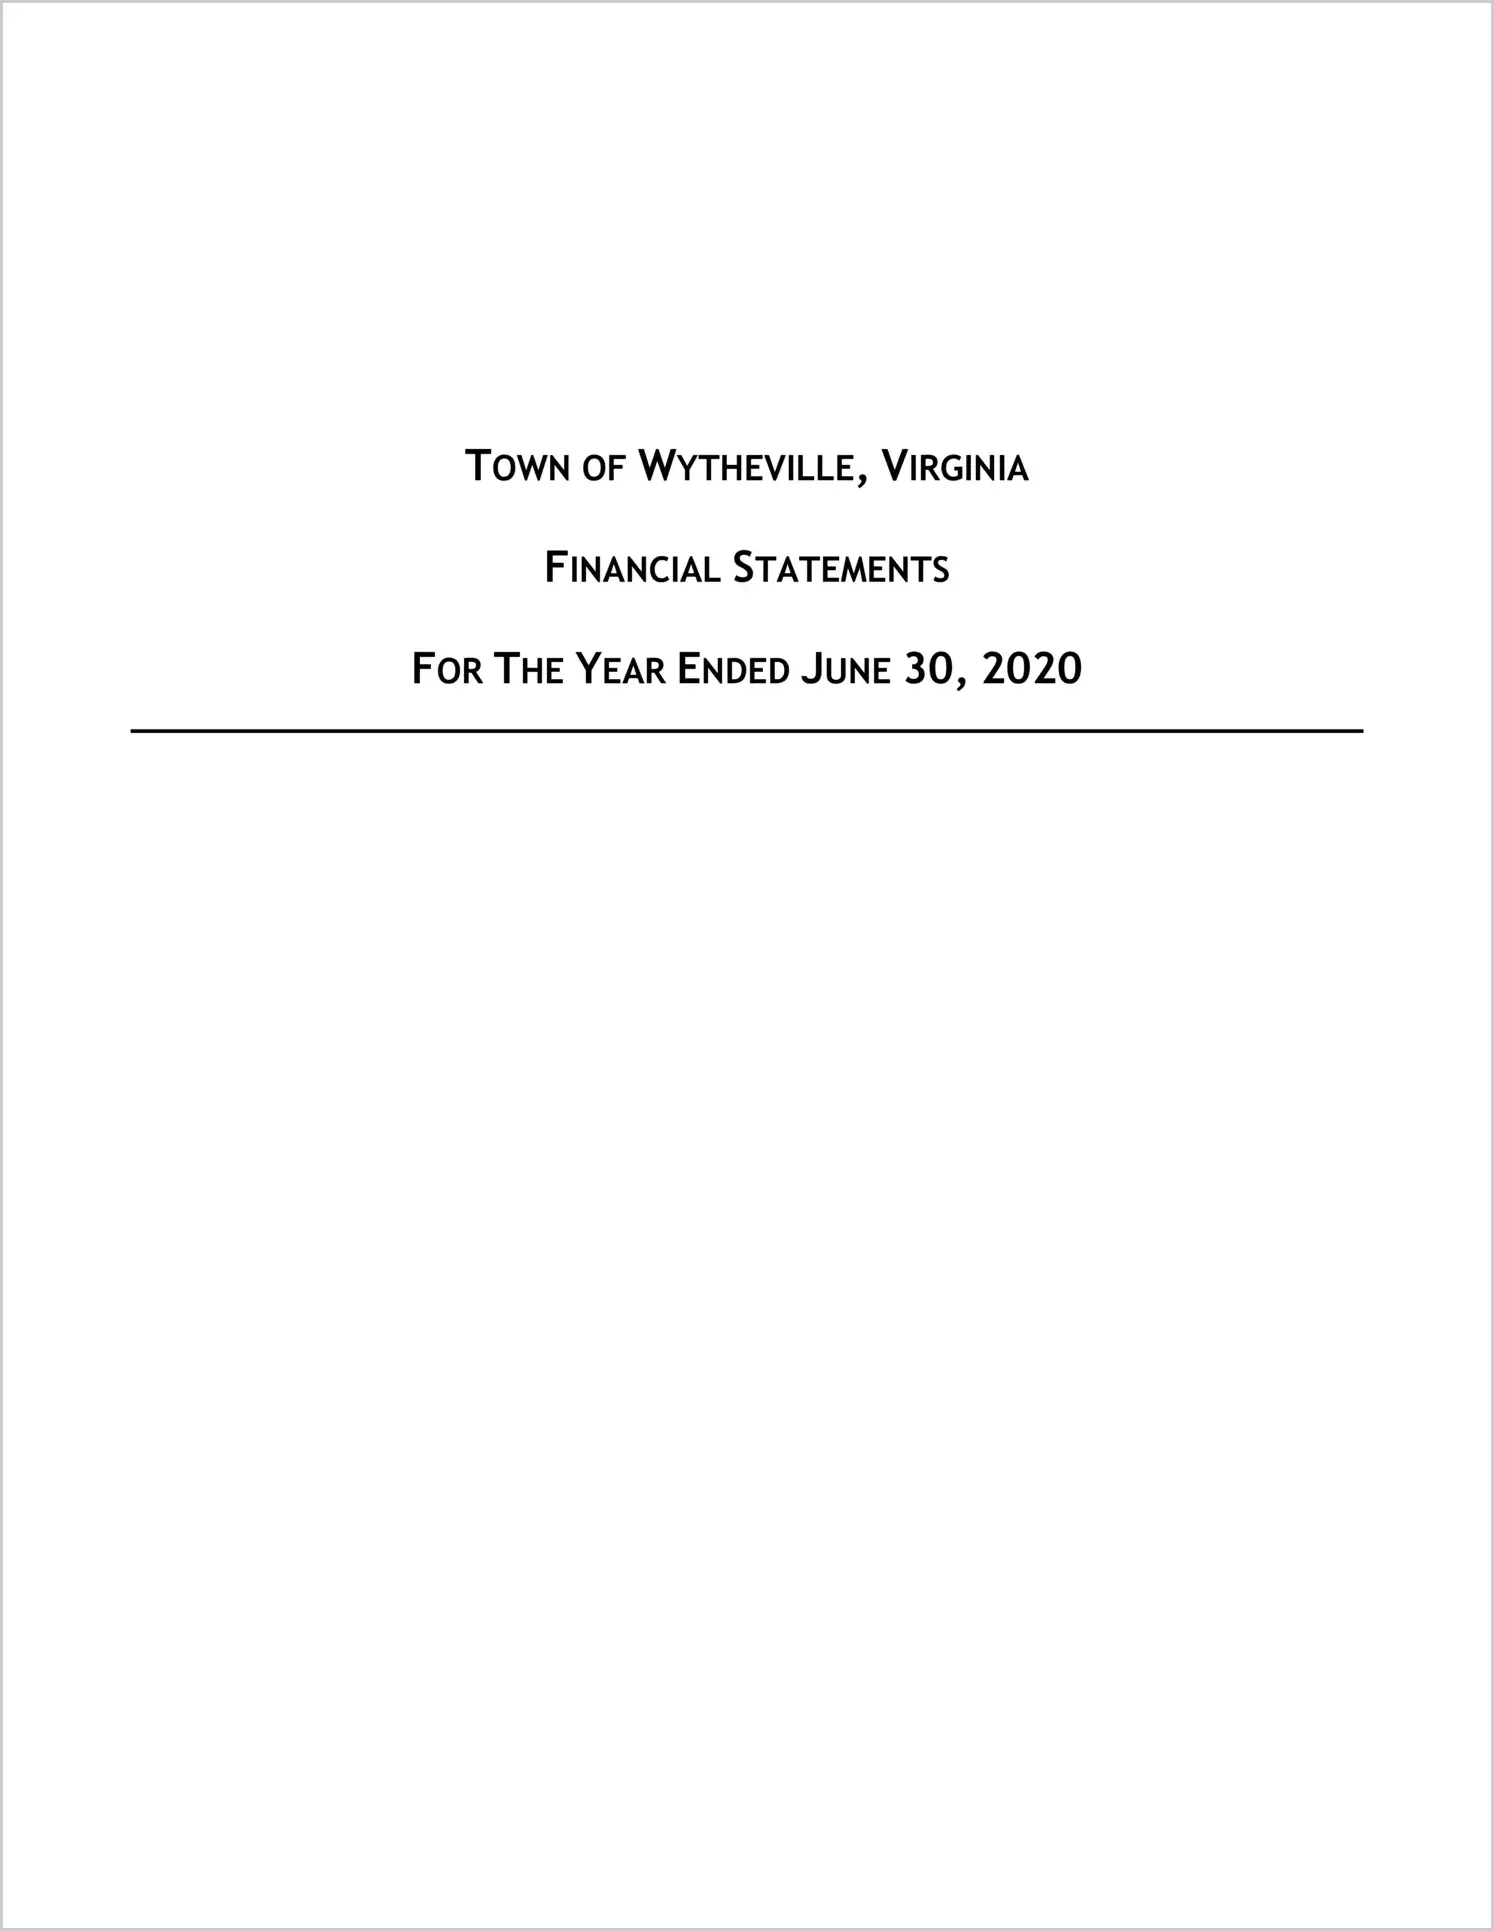 2020 Annual Financial Report for Town of Wytheville